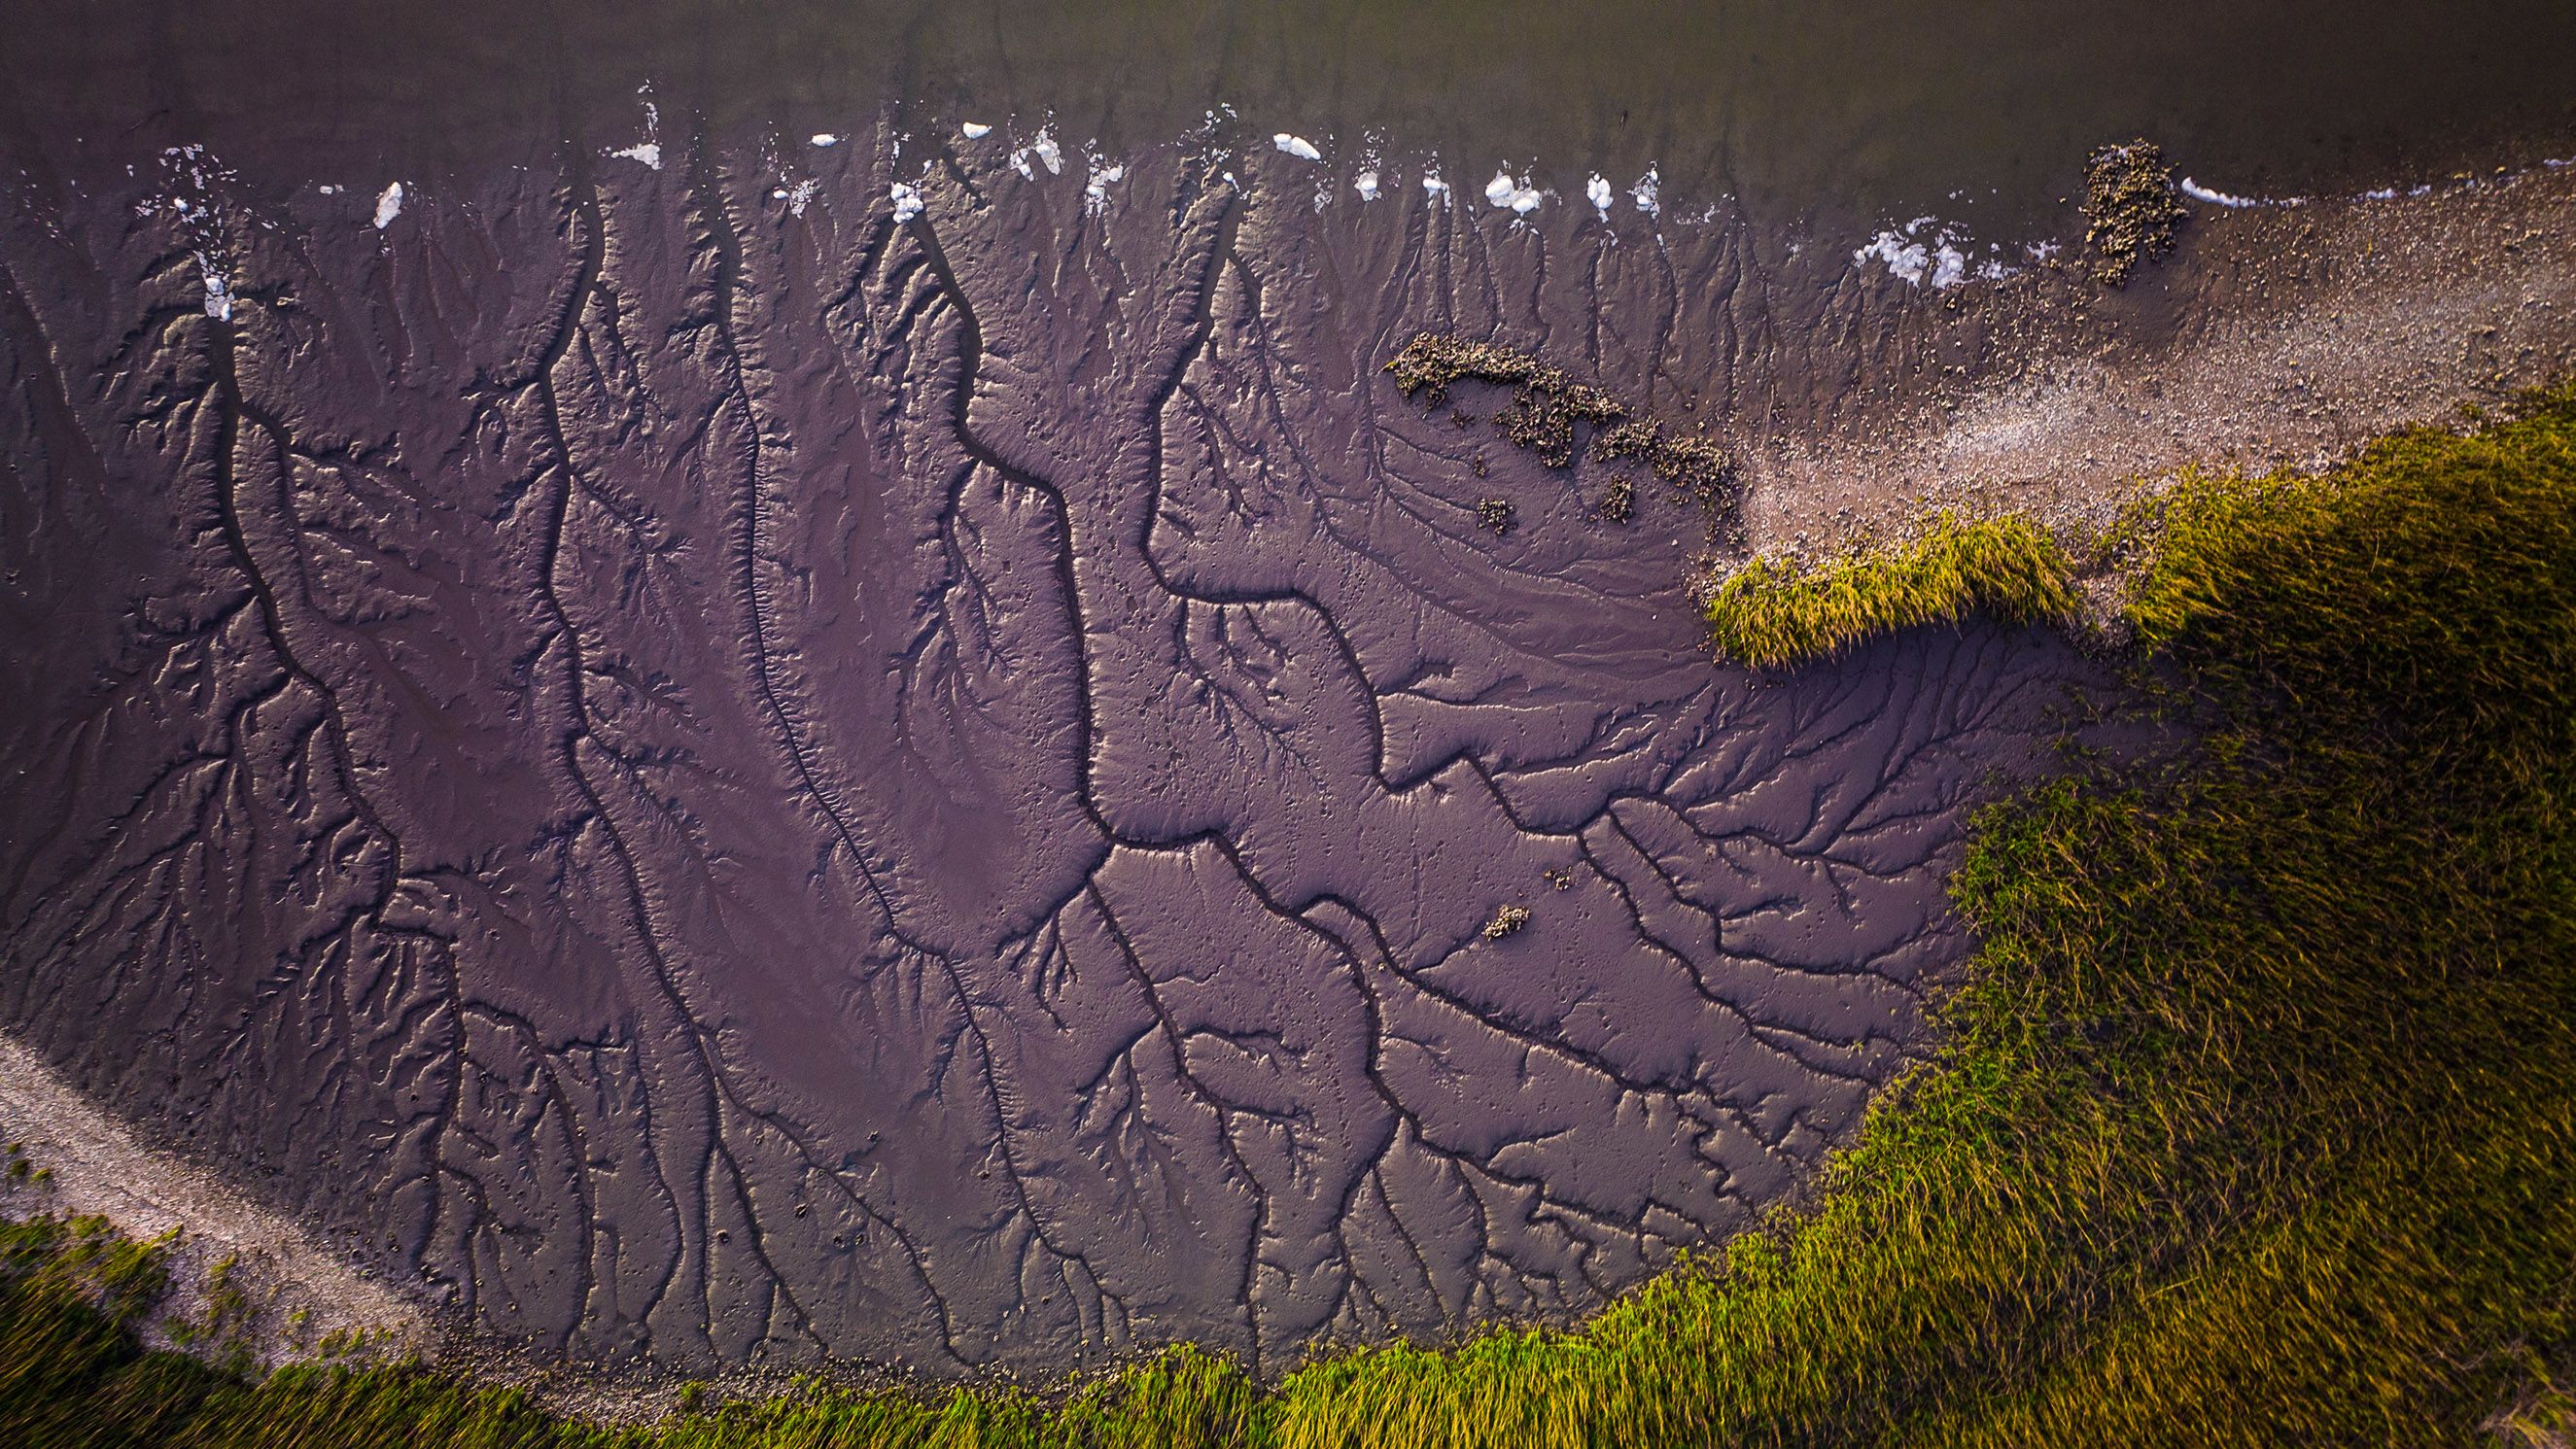 An aerial view of a salt marsh. The mud is dark grey and has vein-like cracks running through it. There is marsh grass around the edges of the image.